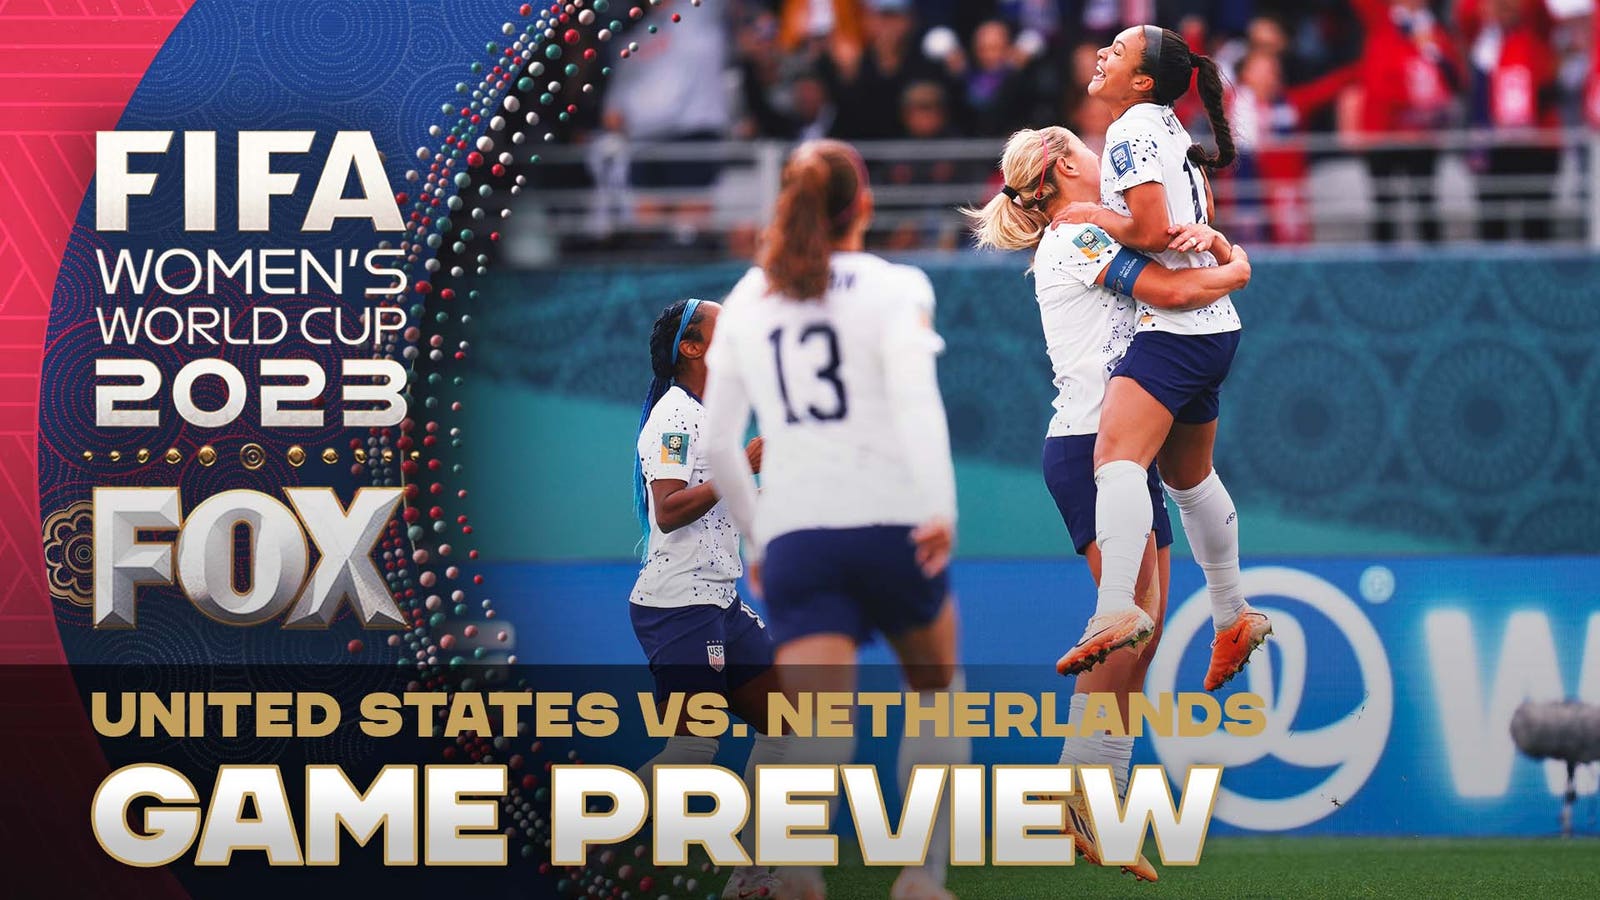 'This is the first time Team USA will be tested defensively' - Ari Hingst on the upcoming USWNT game against the Netherlands